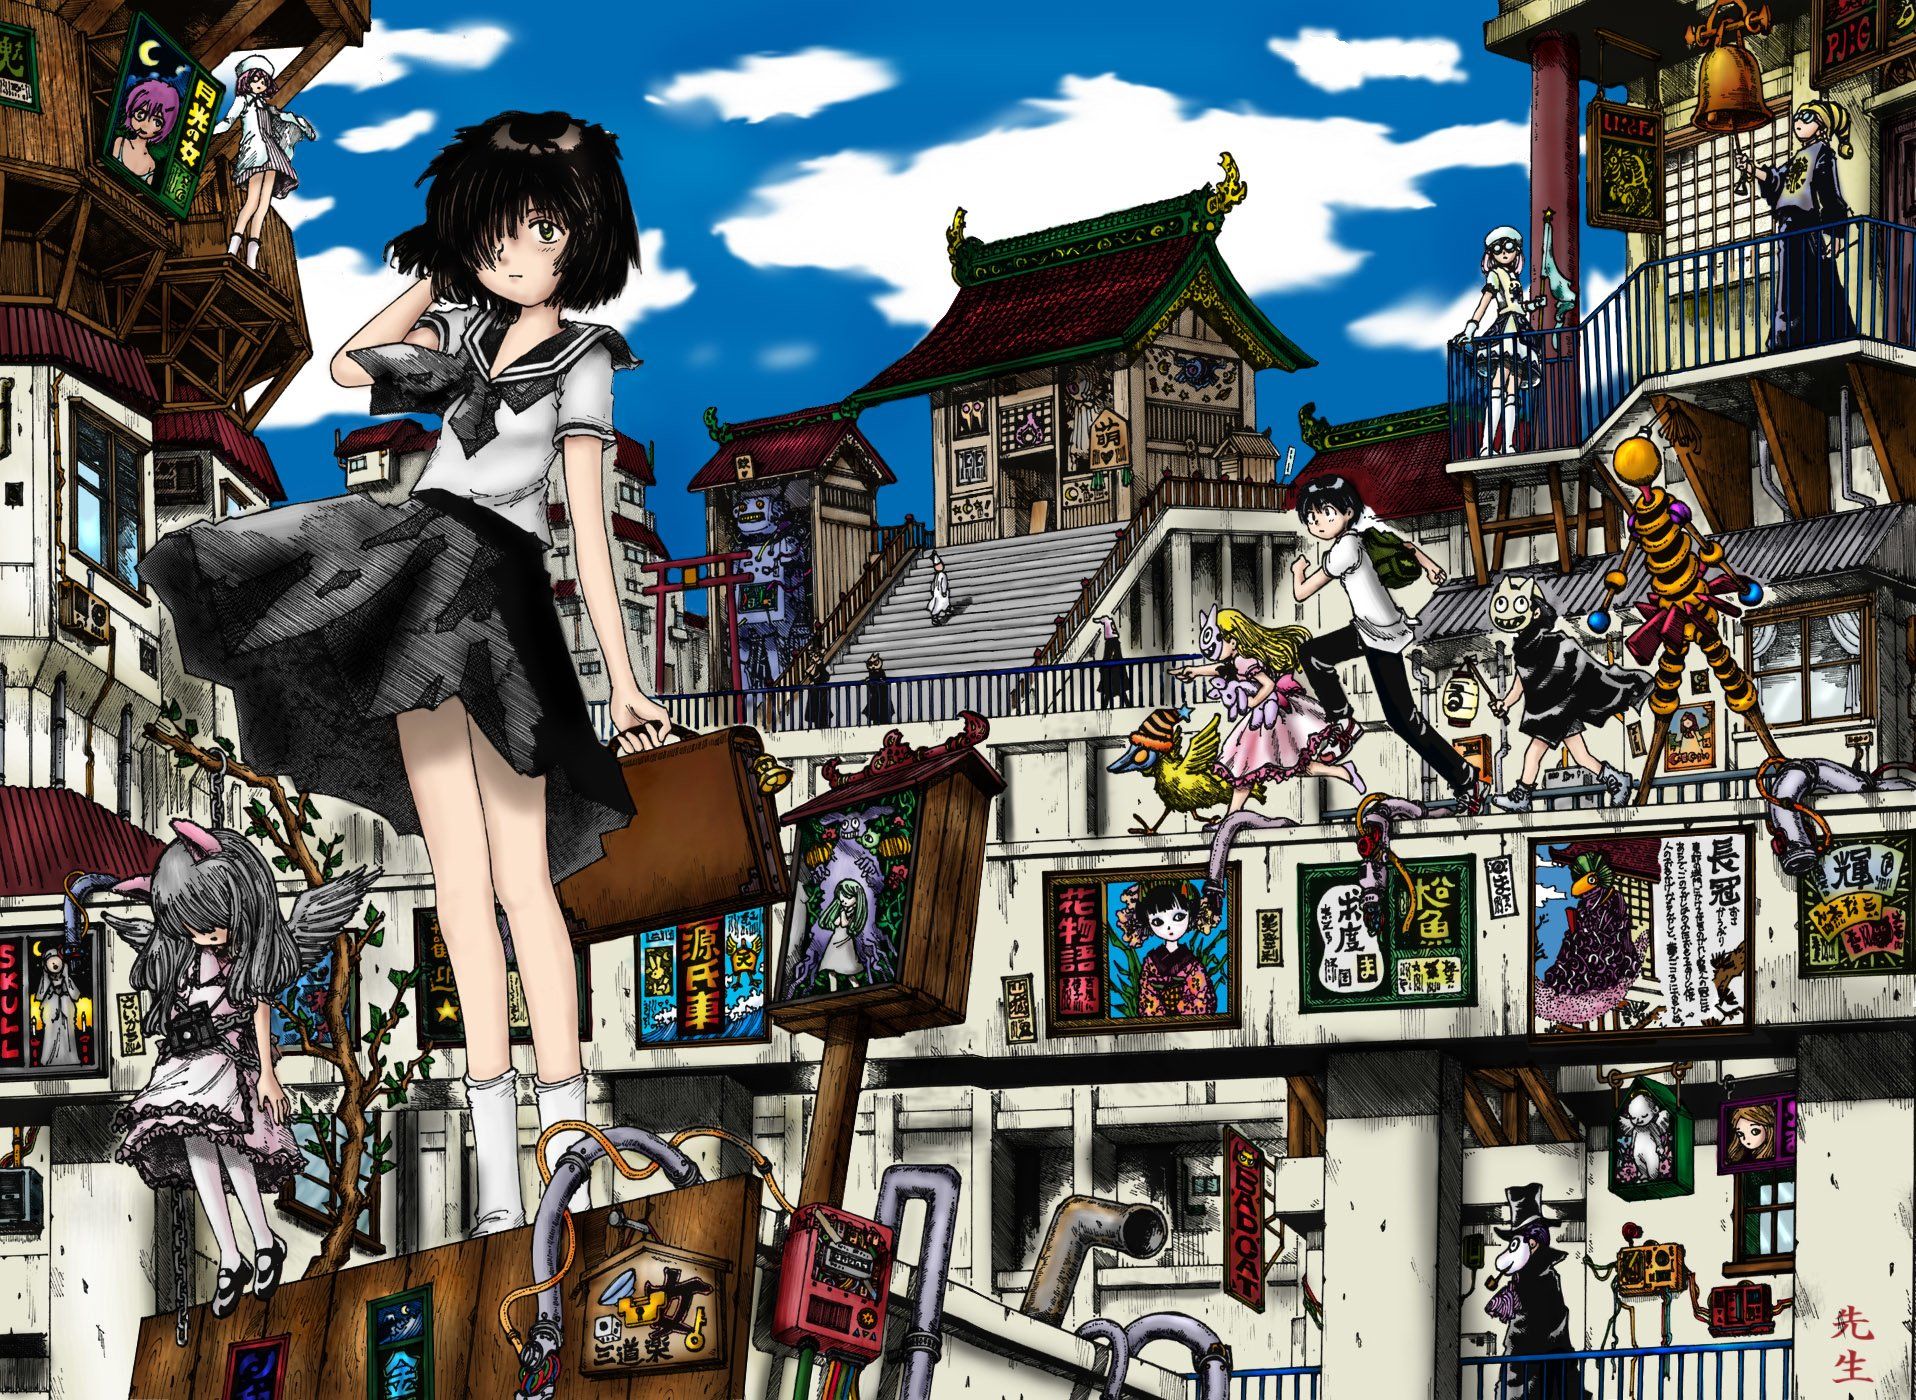 Nazo no kanojo x wallpaper by blodrain - Download on ZEDGE™